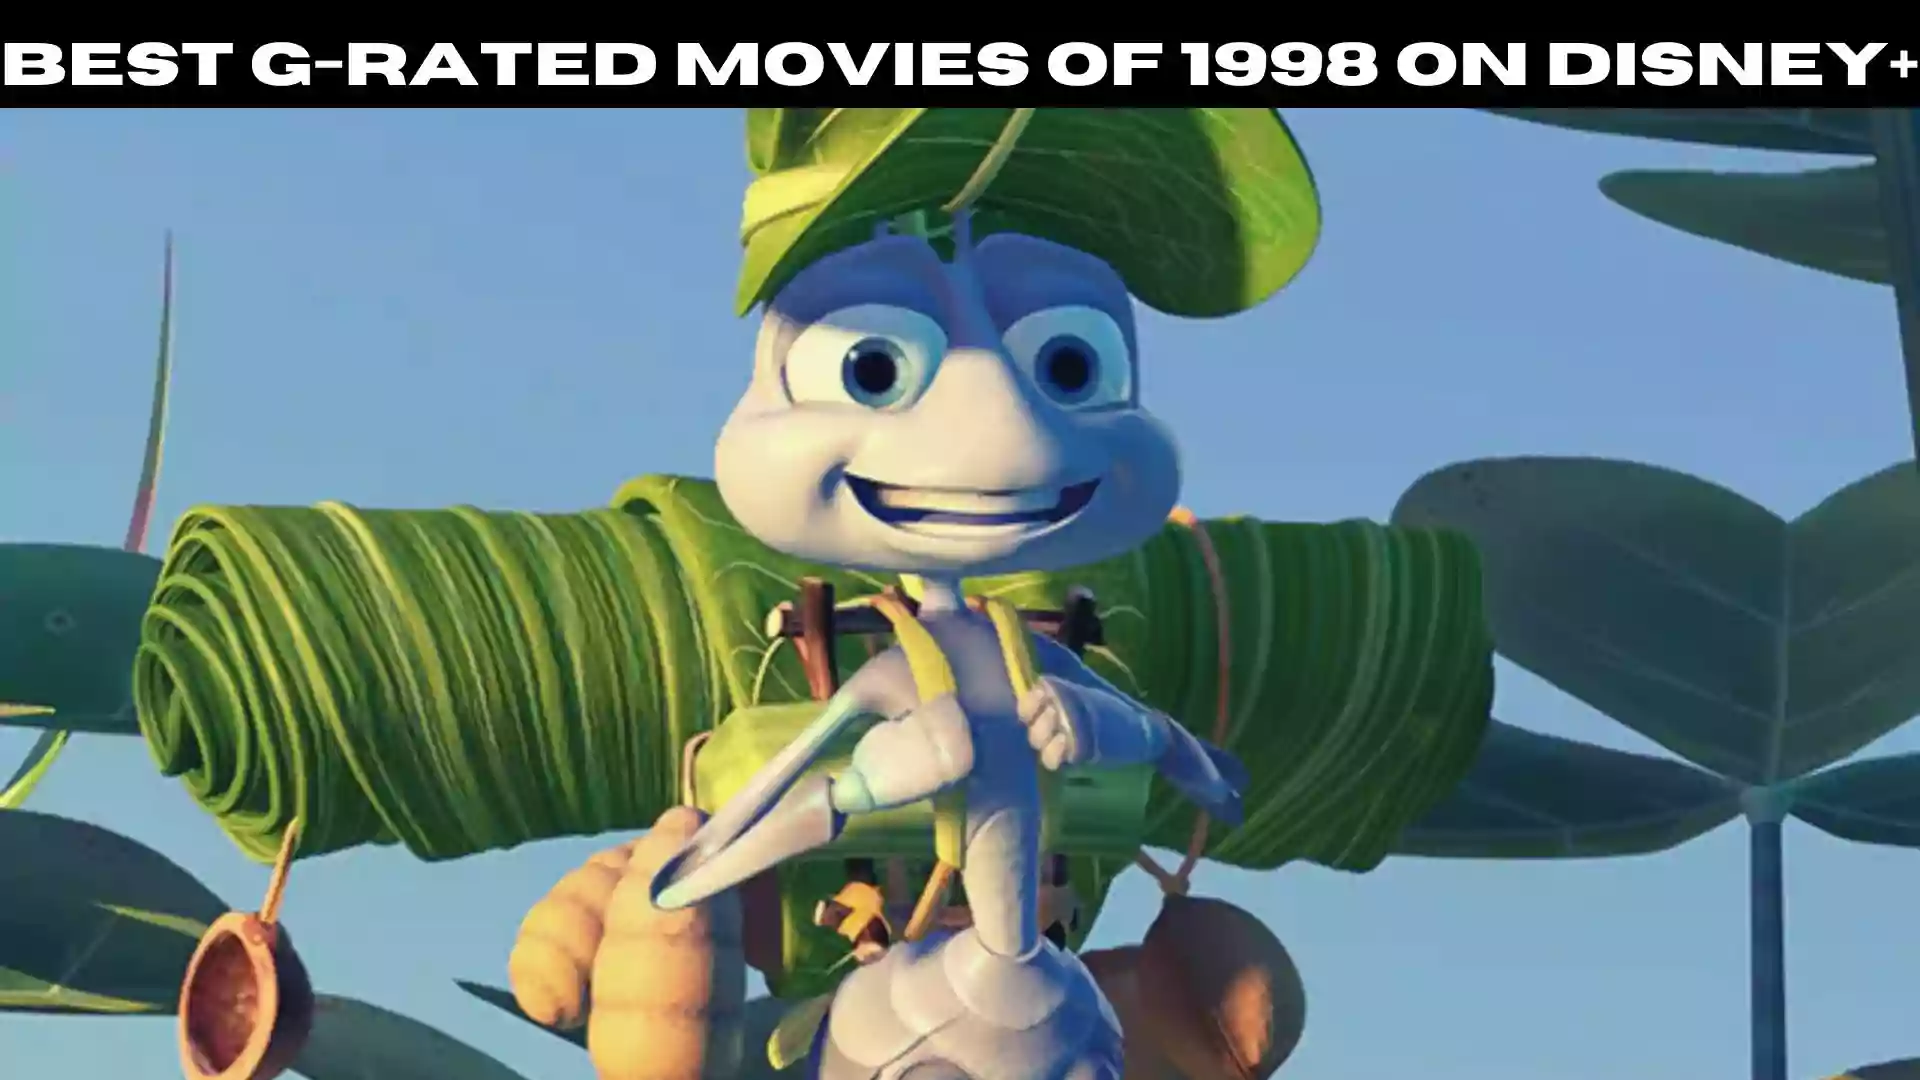 Best G-Rated Movies of 1998 on Disney+